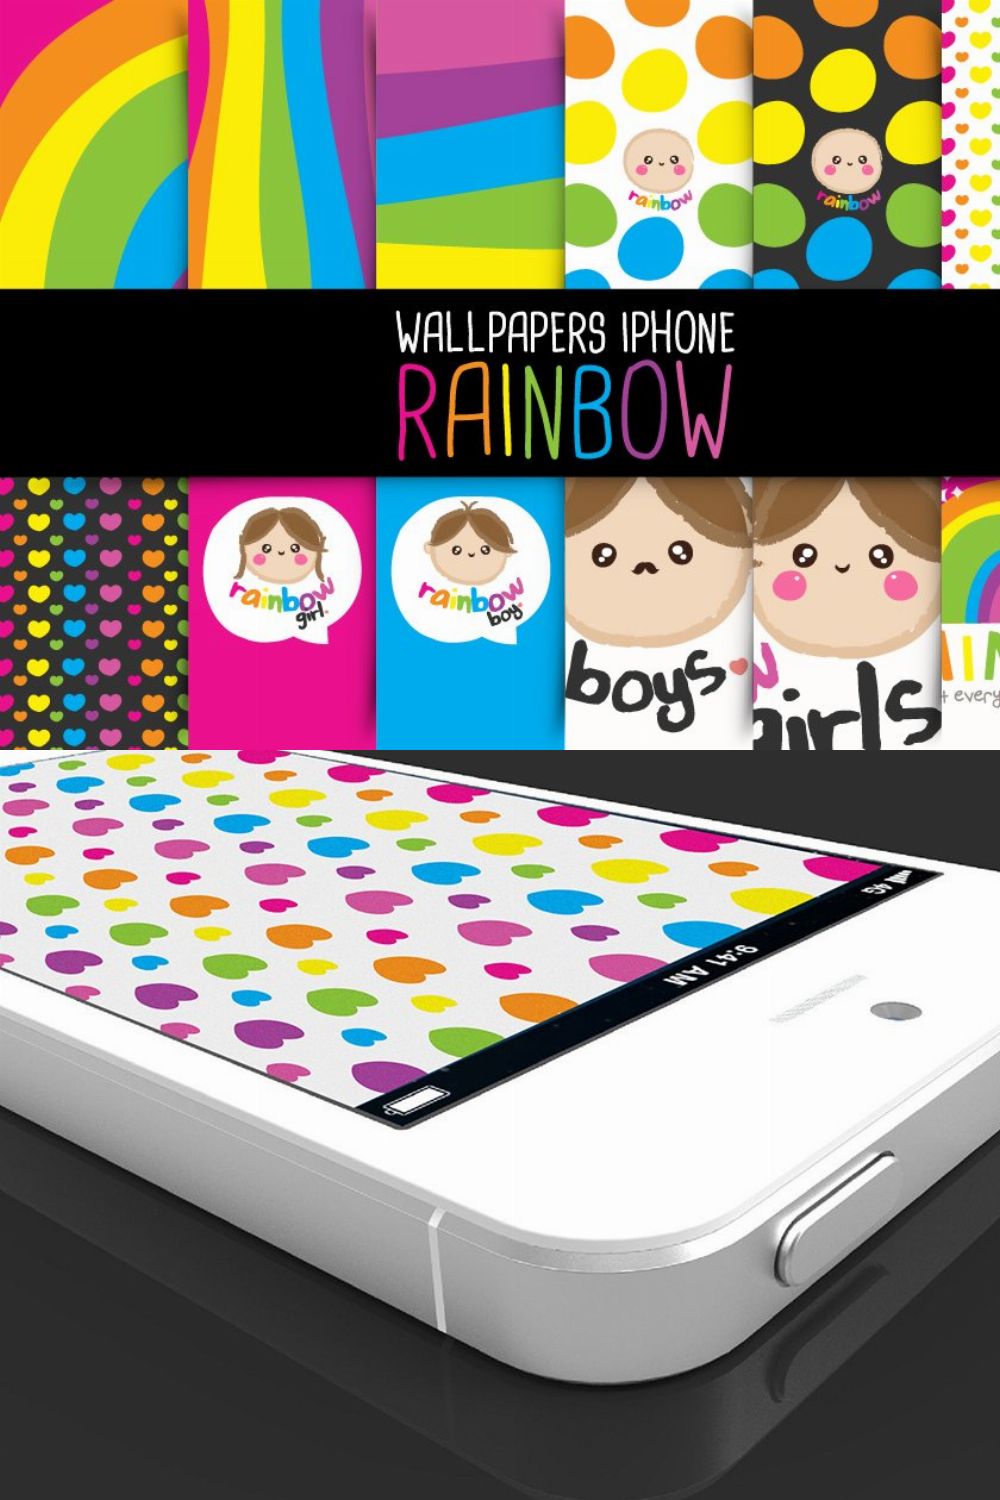 Wallpapers iPhone//Rainbow pinterest preview image.